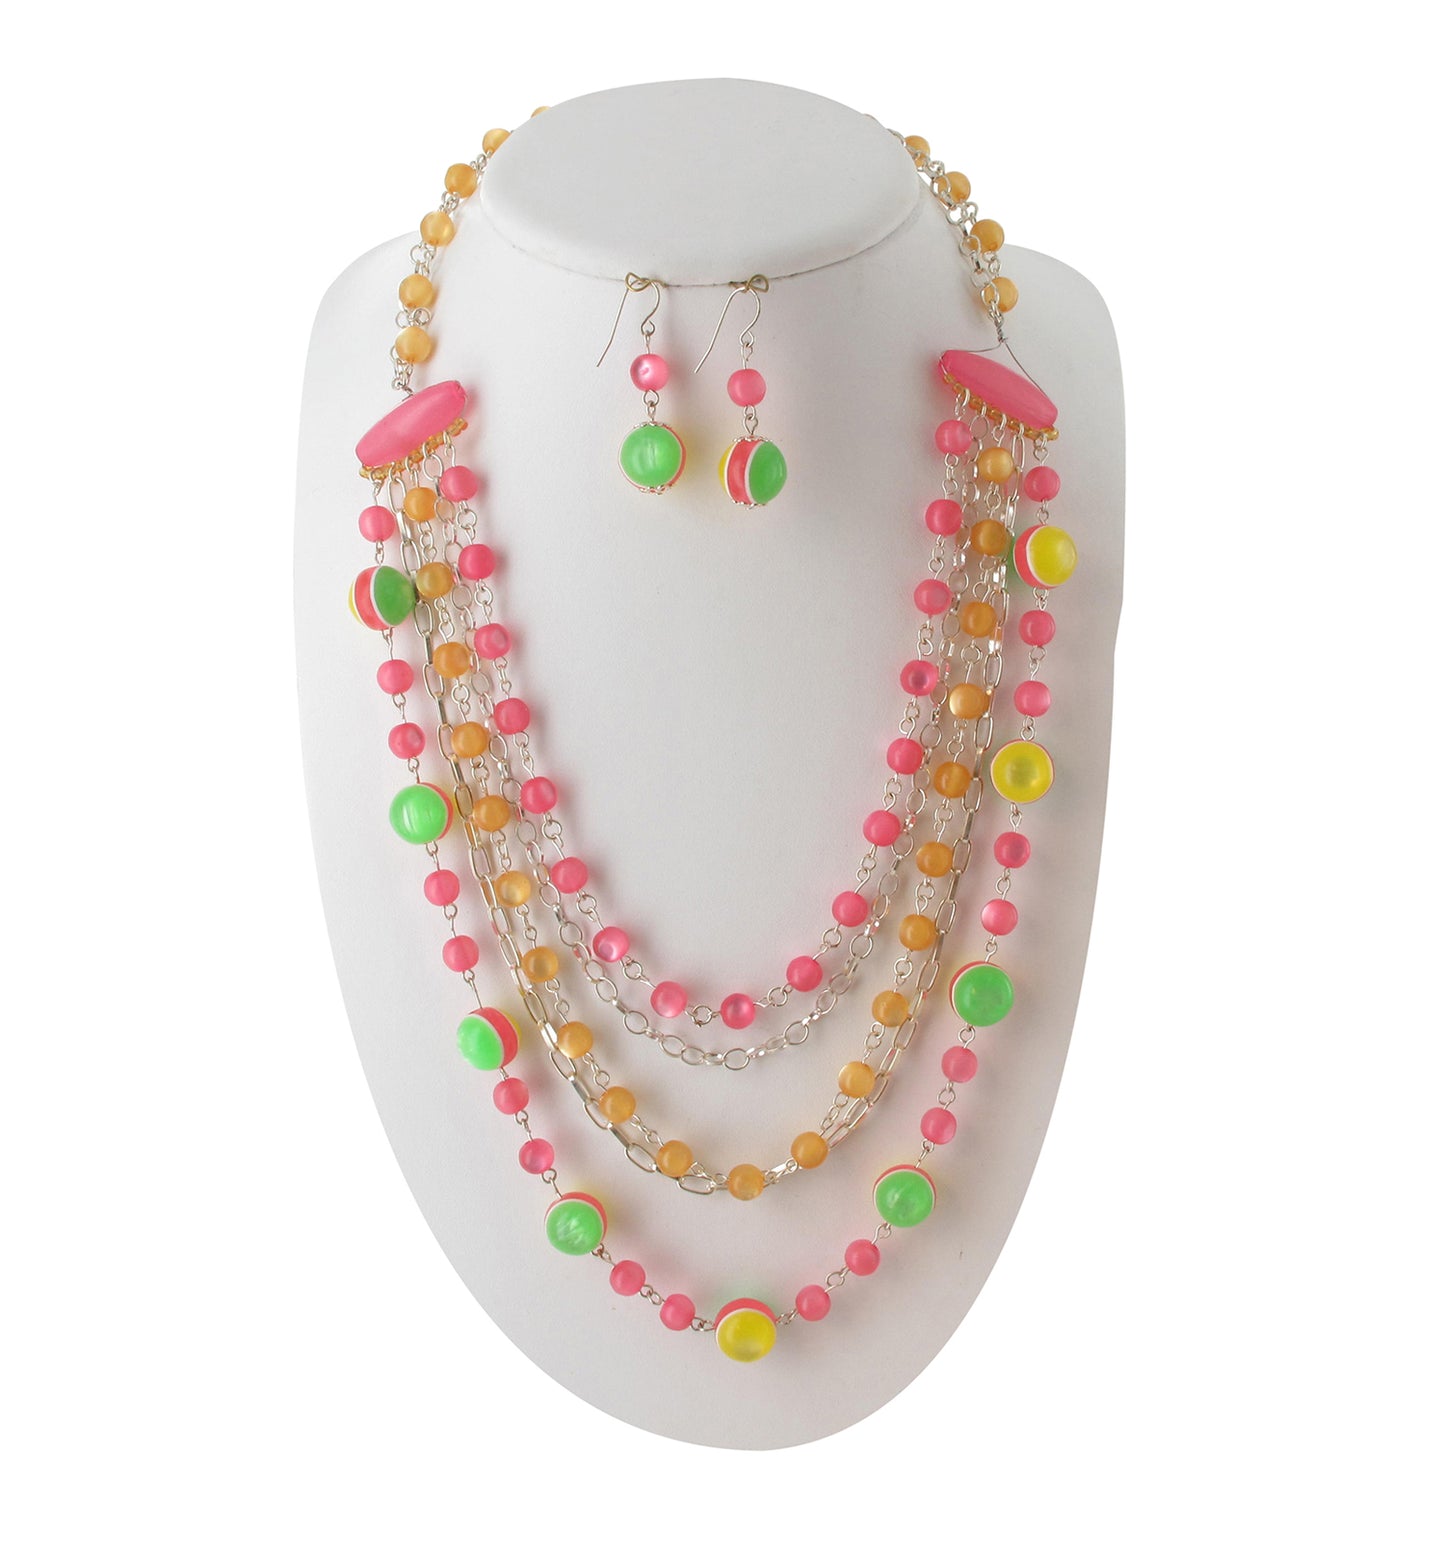 Pink Yellow Beaded Chain Silver Tone Necklace Set 32" Pierced Earrings